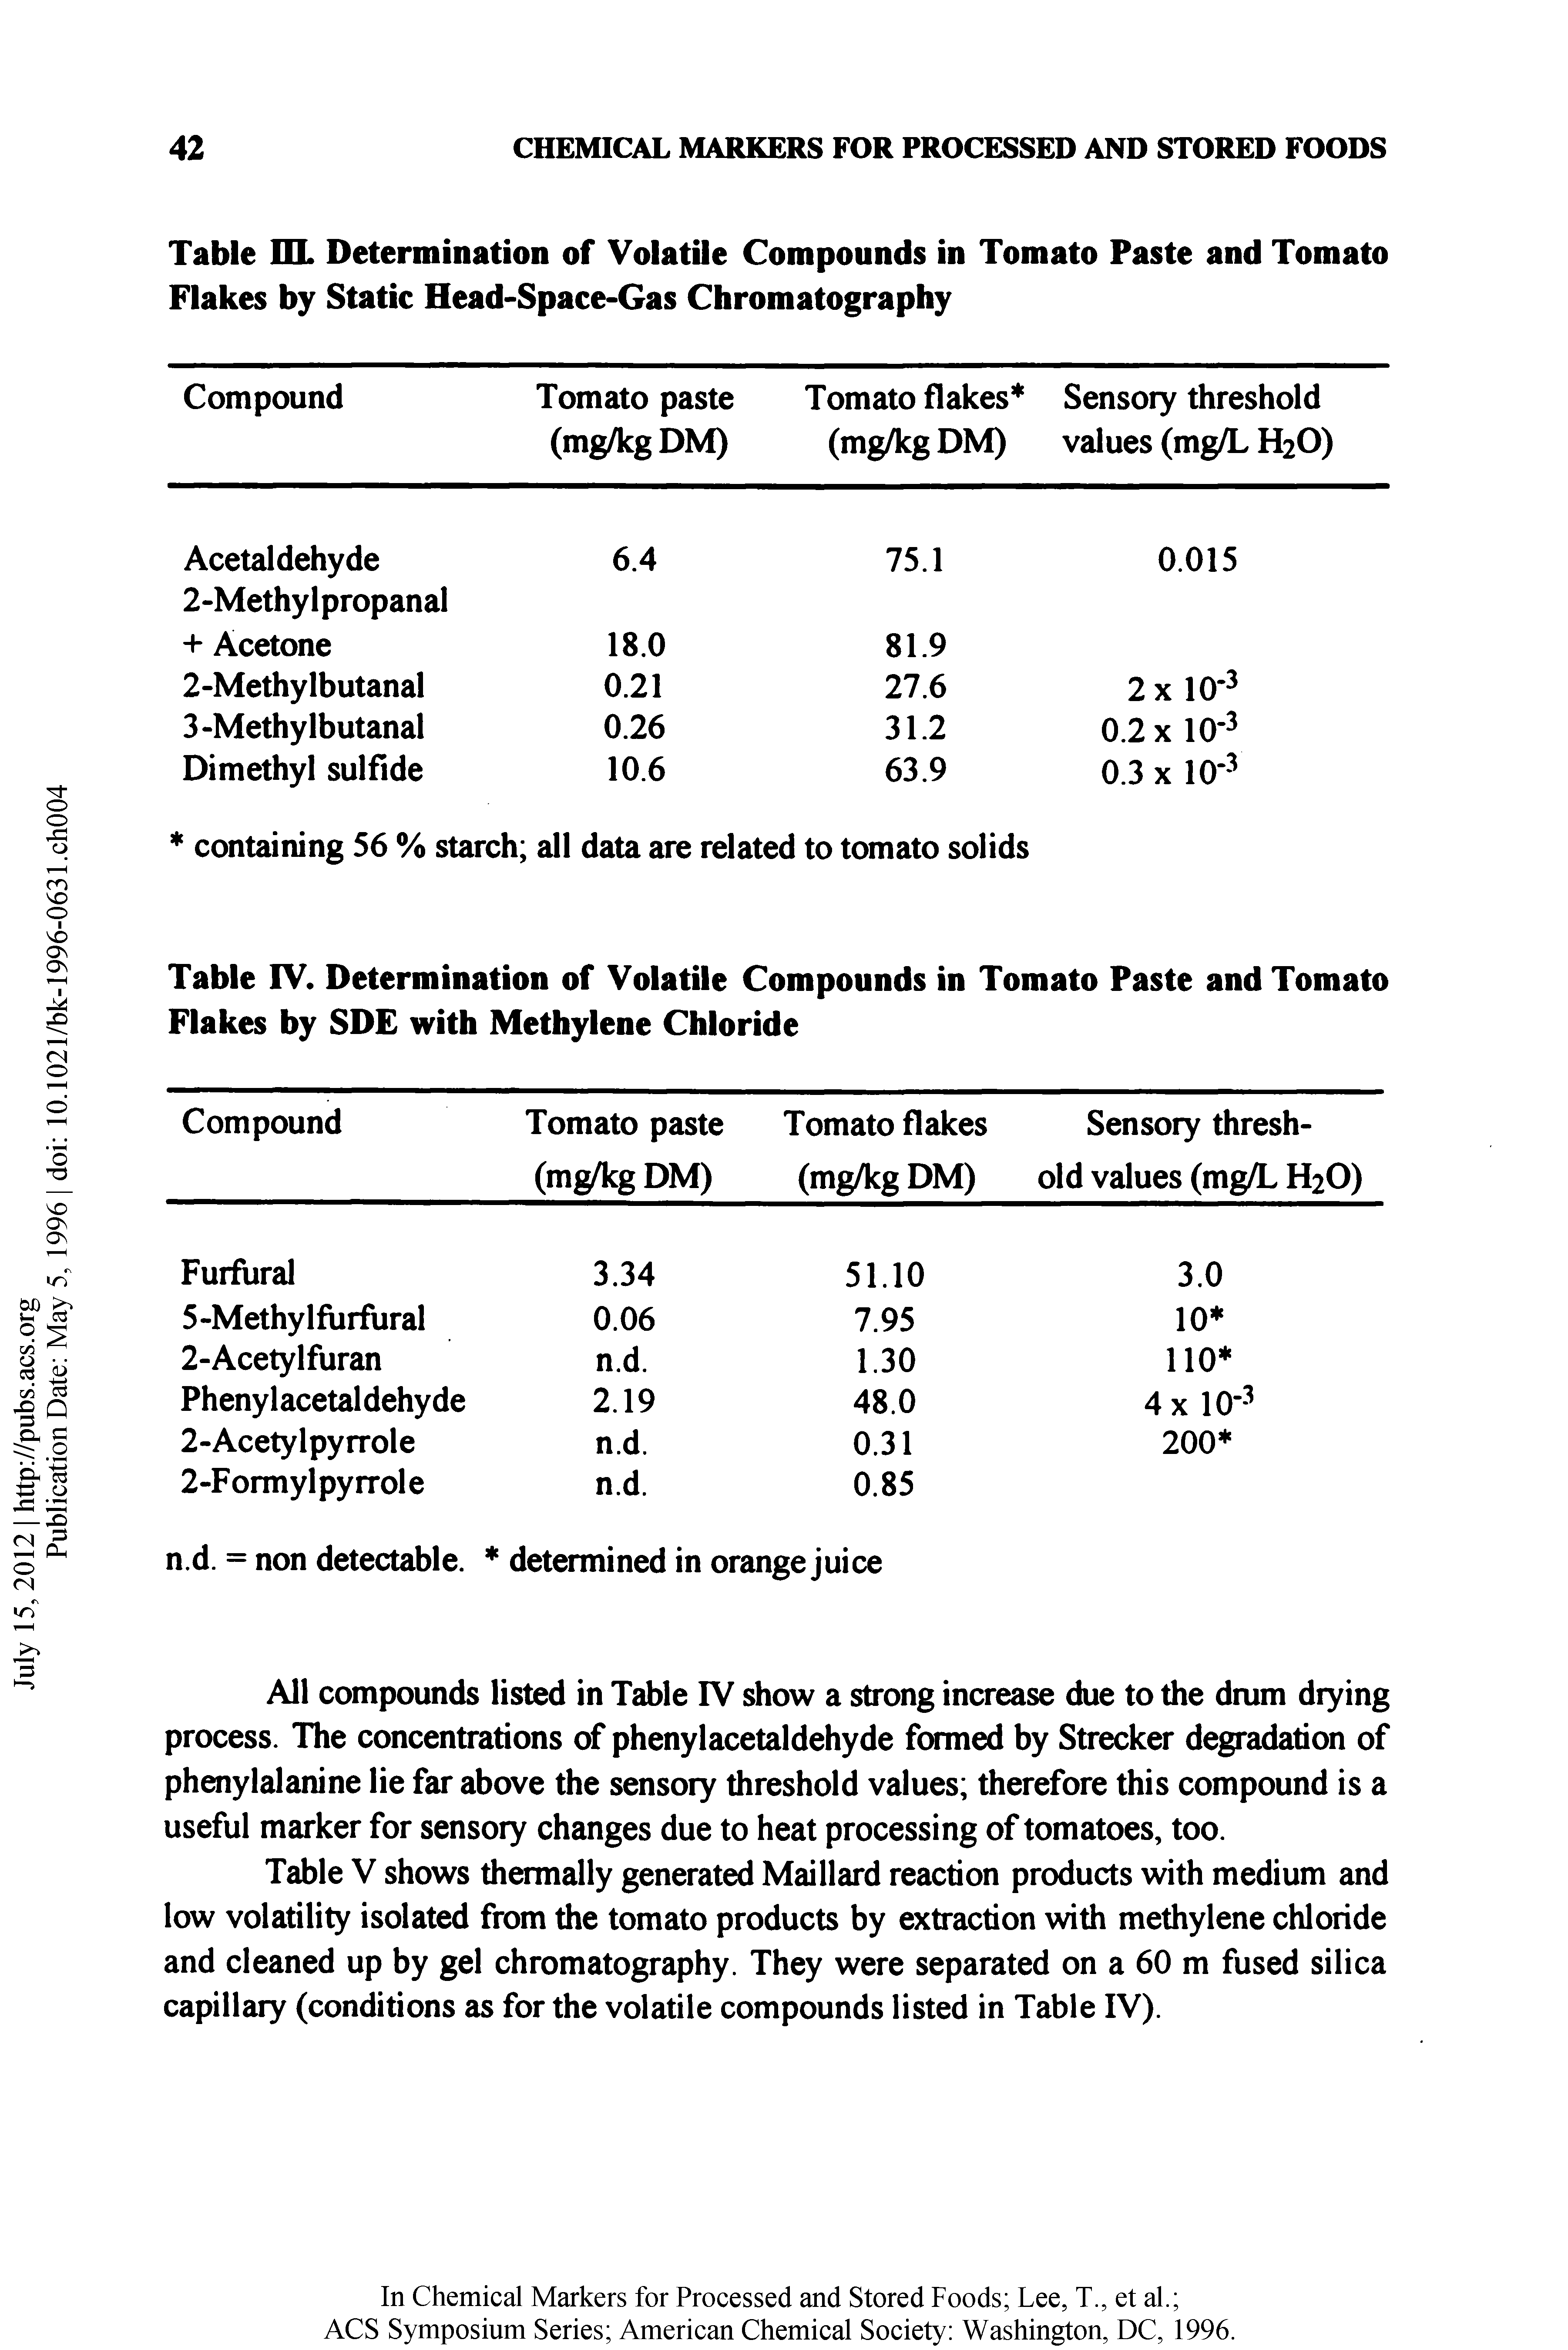 Table V shows thermally generated Maillard reaction products with medium and low volatility isolated from the tomato products by extraction with methylene chloride and cleaned up by gel chromatography. They were separated on a 60 m fused silica capillary (conditions as for the volatile compounds listed in Table IV).